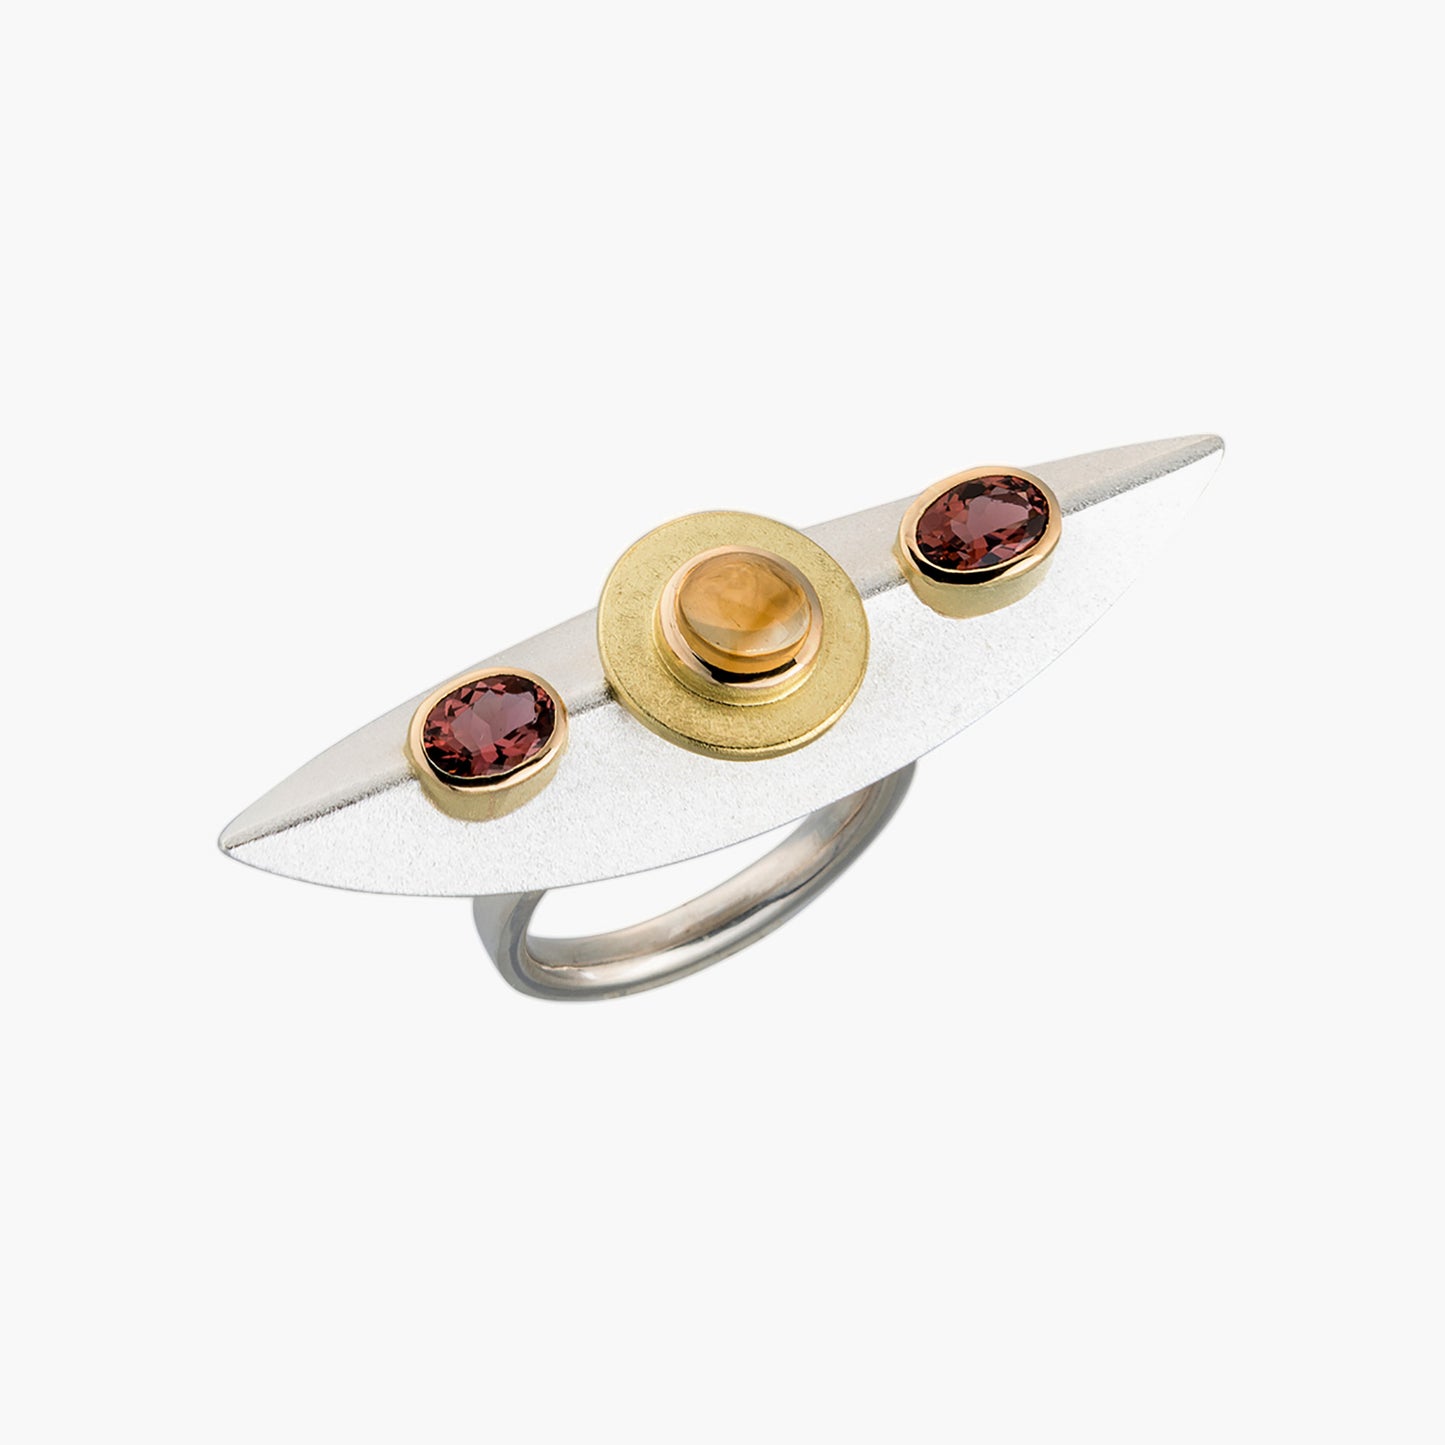 Sterling silver statement ring with almond-shaped design, featuring a round golden citrine and two oval tourmaline gemstones set in 18k gold